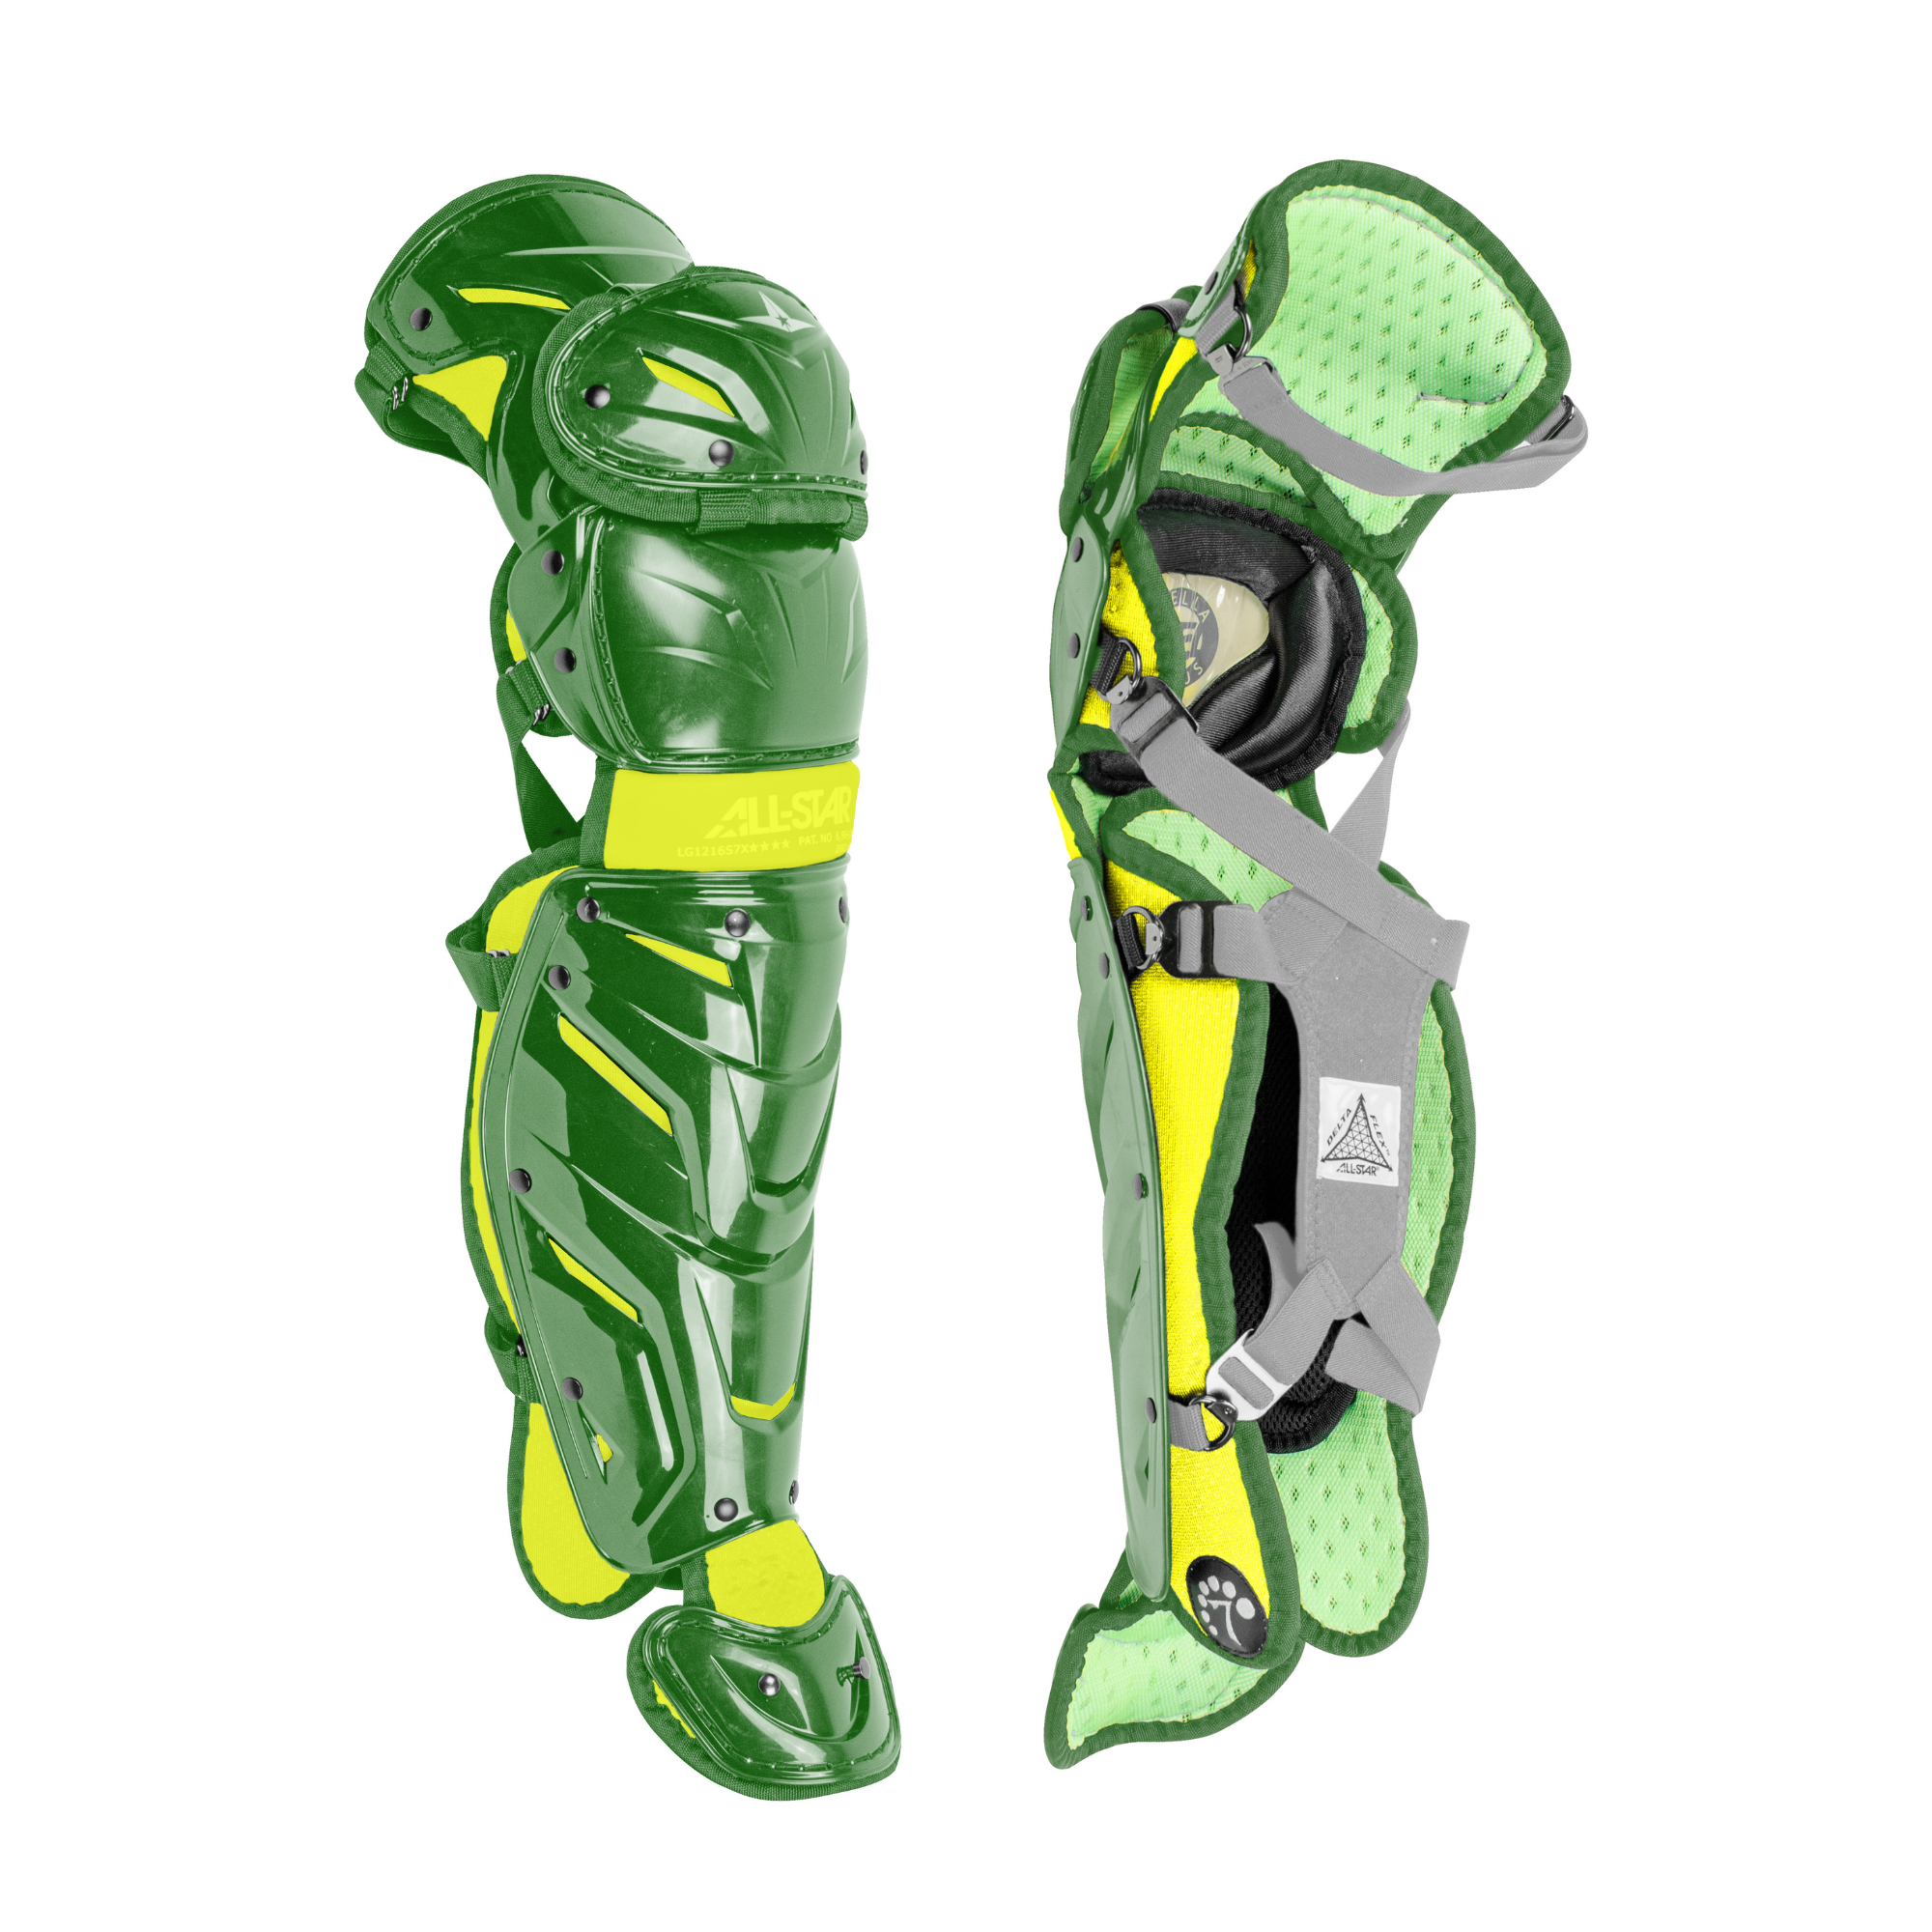 All-Star S7 AXIS Leg Guards / Two Tone / Ages 12-16